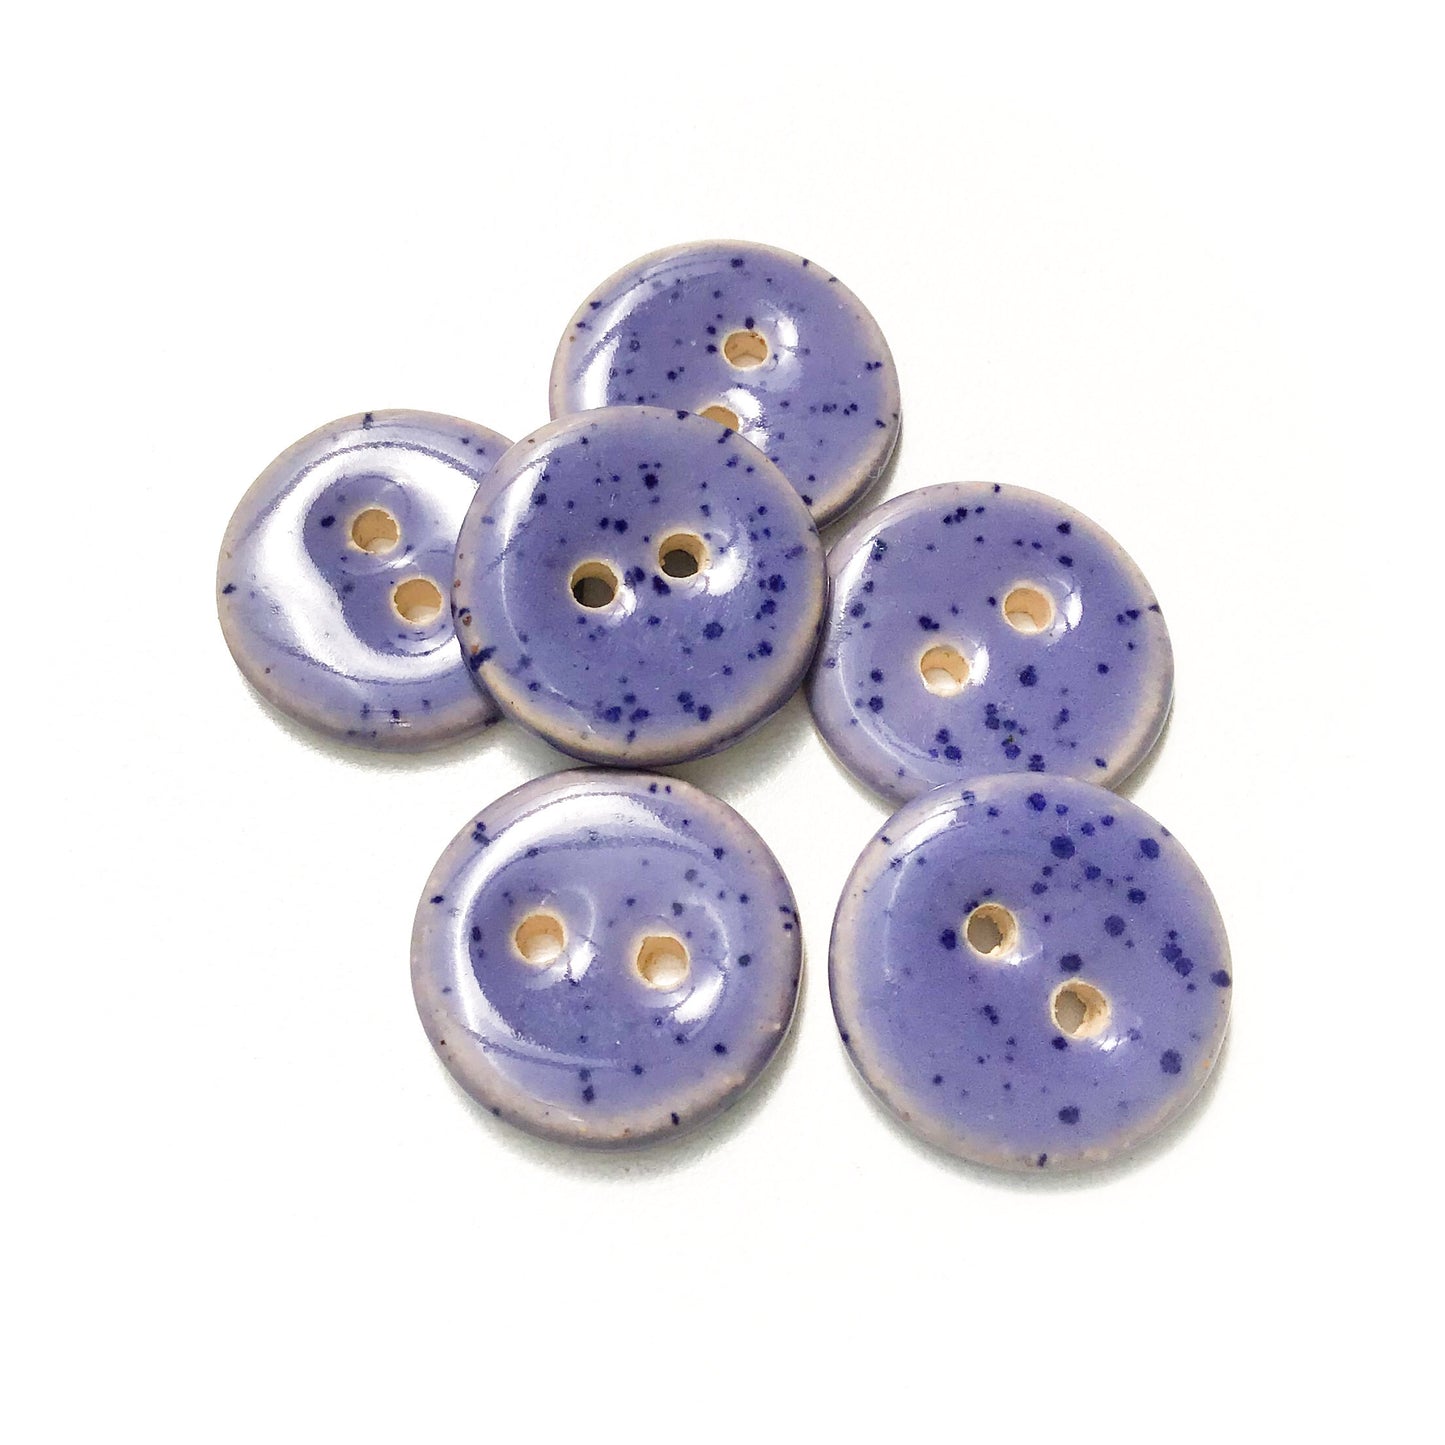 Speckled Purple Ceramic Buttons - Purple Clay Buttons - 3/4" - 6 Pack